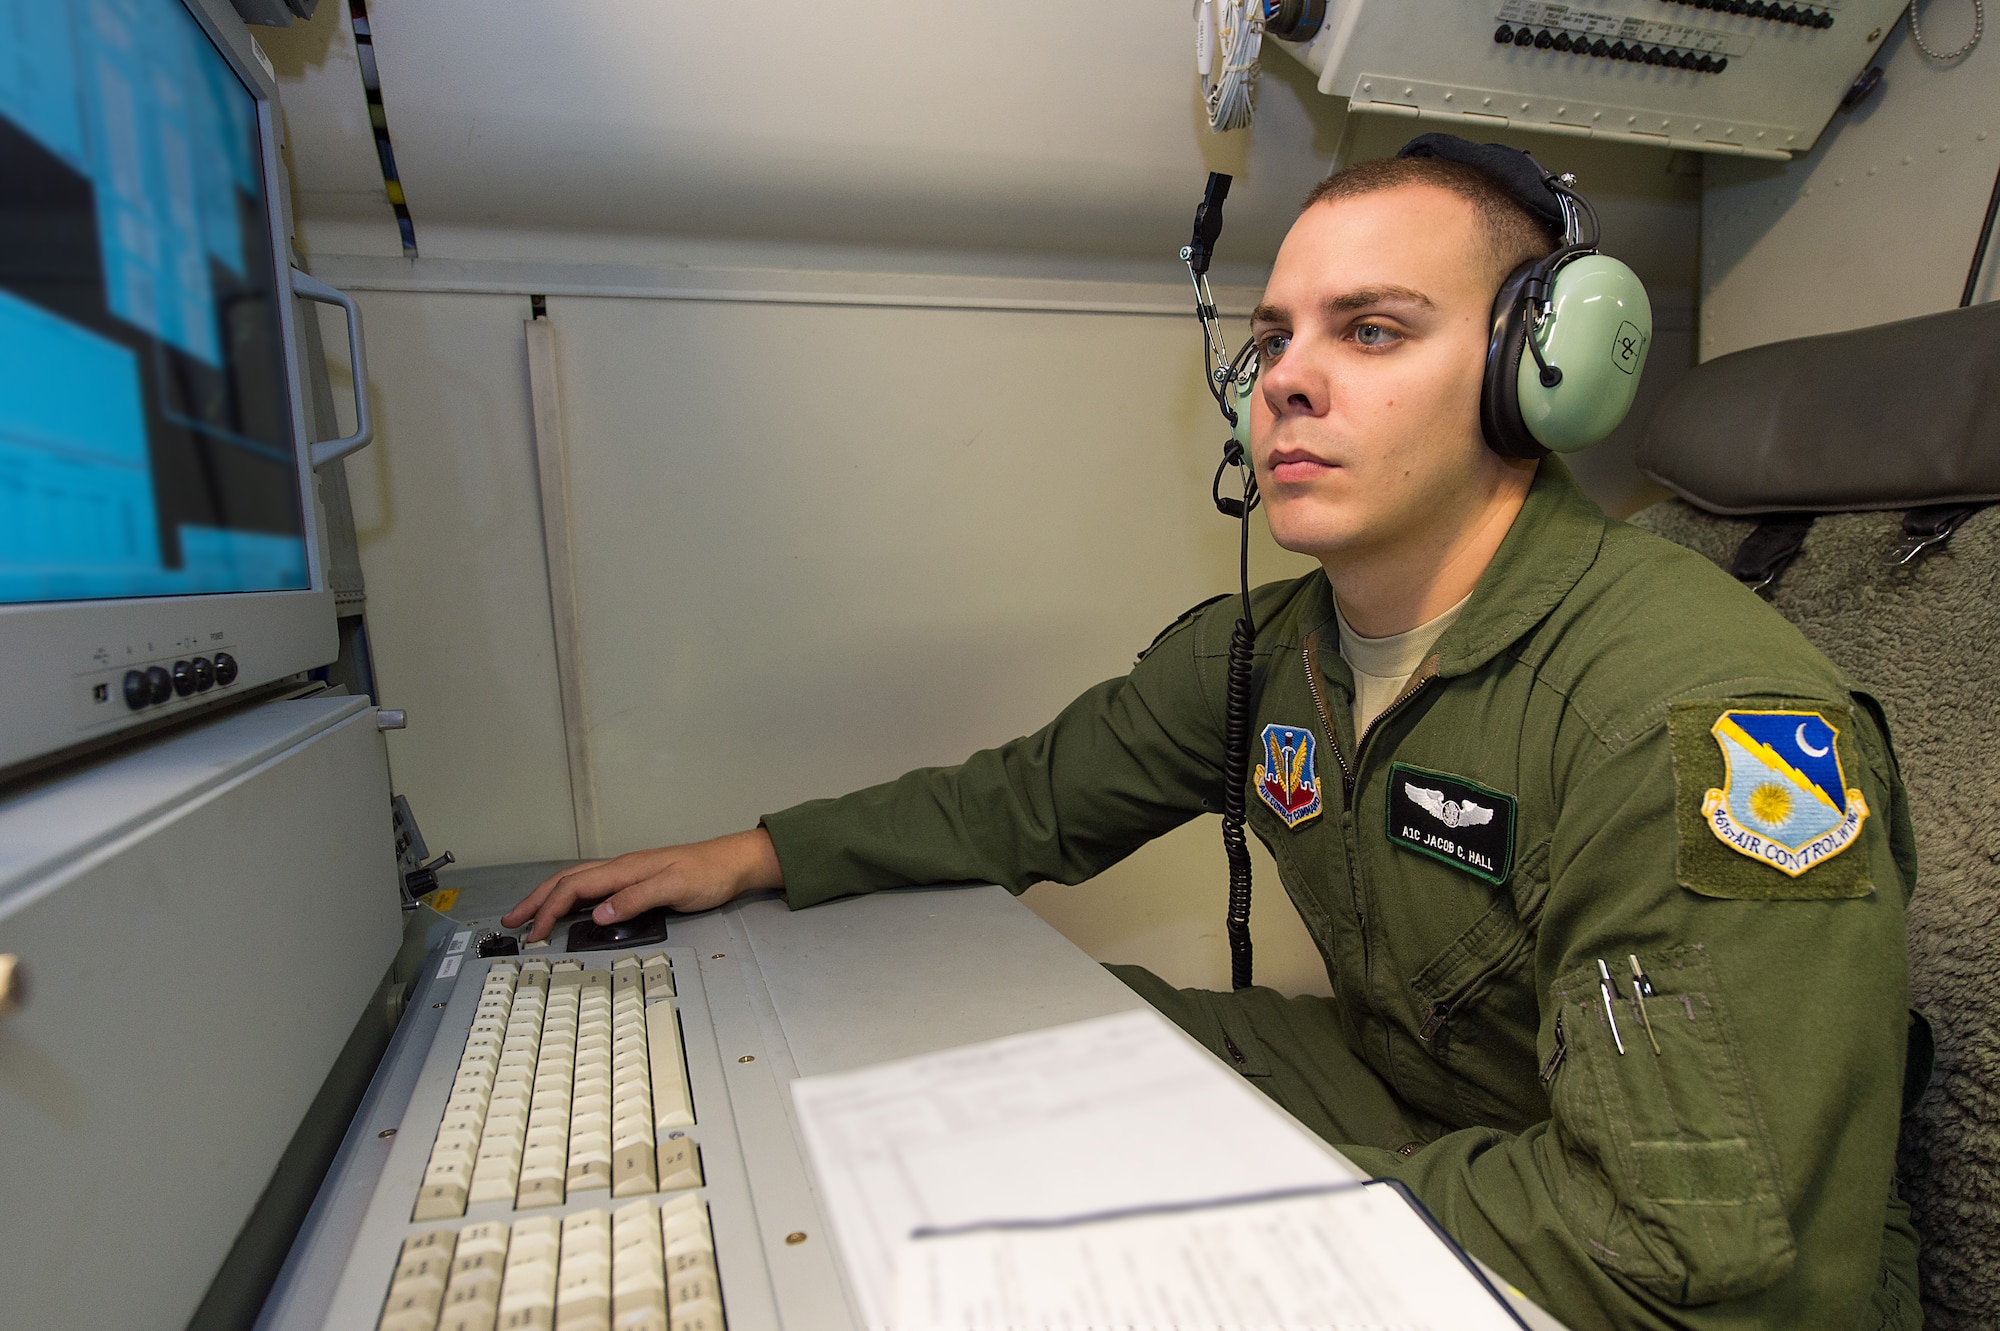 U.S. Air Force Airman 1st Class Jacob Hall, a radar technician with the 12th Airborne Command and Control Squadron, performs an ops check on the radar system of an E-8C Joint STARS in preparation for a mission during the Northern Strike 2015 combat exercise, Robins Air Force Base, Ga., July 29, 2015. Team JSTARS joined military forces from more than 20 states and four coalition countries for the exercise hosted by the Michigan National Guard. Working with a liaison officer from the 116th Air Control Wing (ACW), Georgia Air National Guard, deployed to the exercise headquarters in Michigan, aircrews flying out of Robins Air Force Base from the 461st ACW and Army JSTARS provided real-time tracking information to air and ground forces helping them to find and identify enemy forces played by exercise participants. (U.S. Air National Guard photo by Senior Master Sgt. Roger Parsons/Released) (Portions of the photo have been blurred for security purposes)

